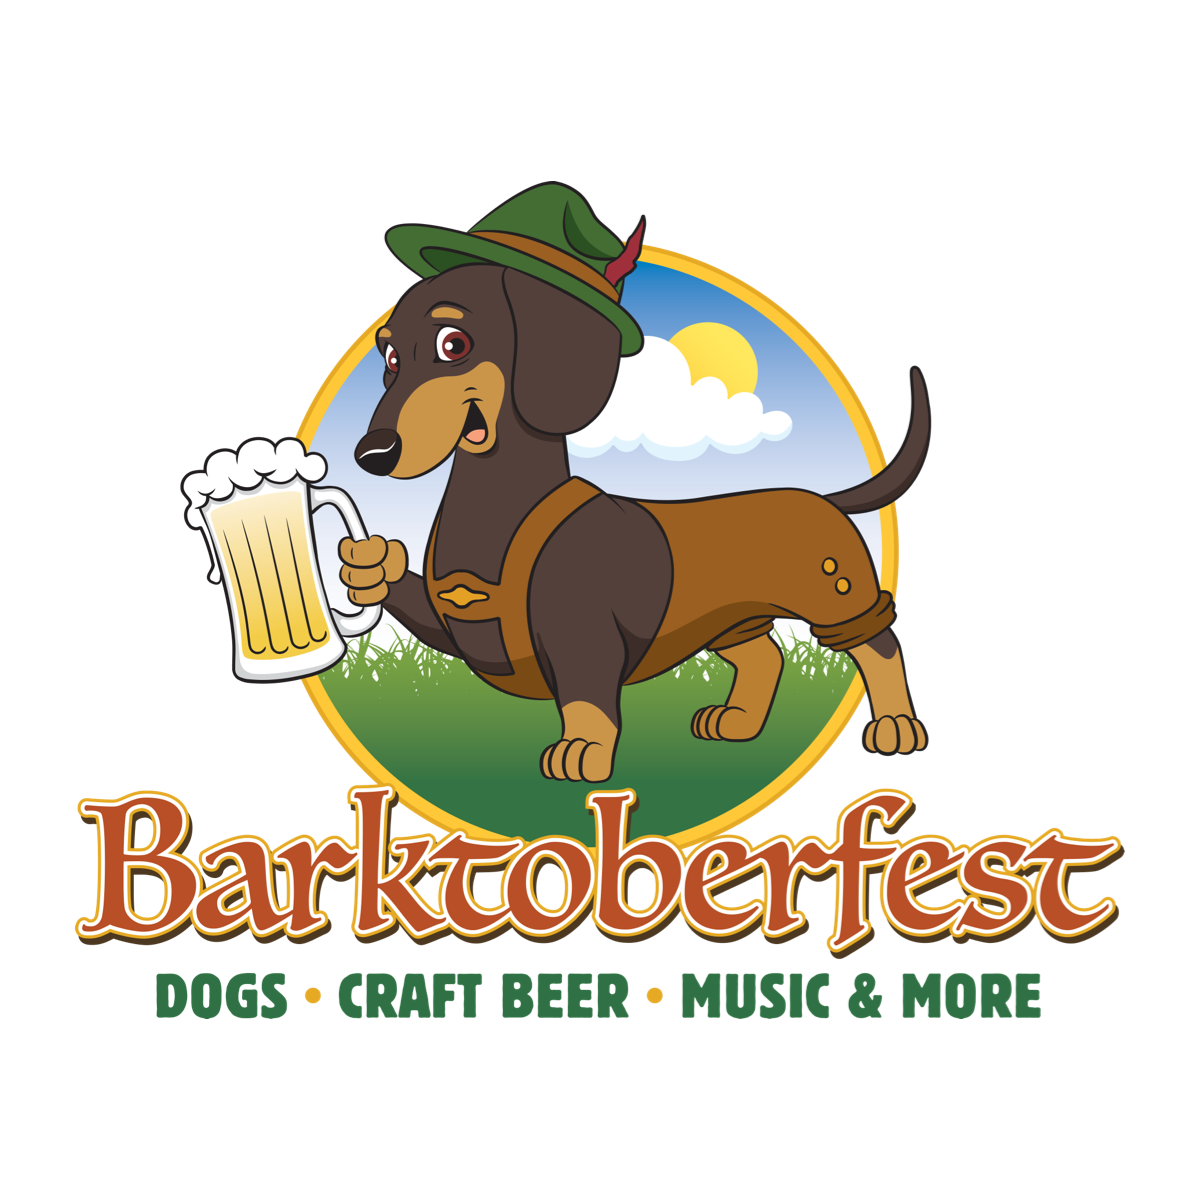 Barktoberfest logo with an illustration of a wiener dog holding a pint of beer